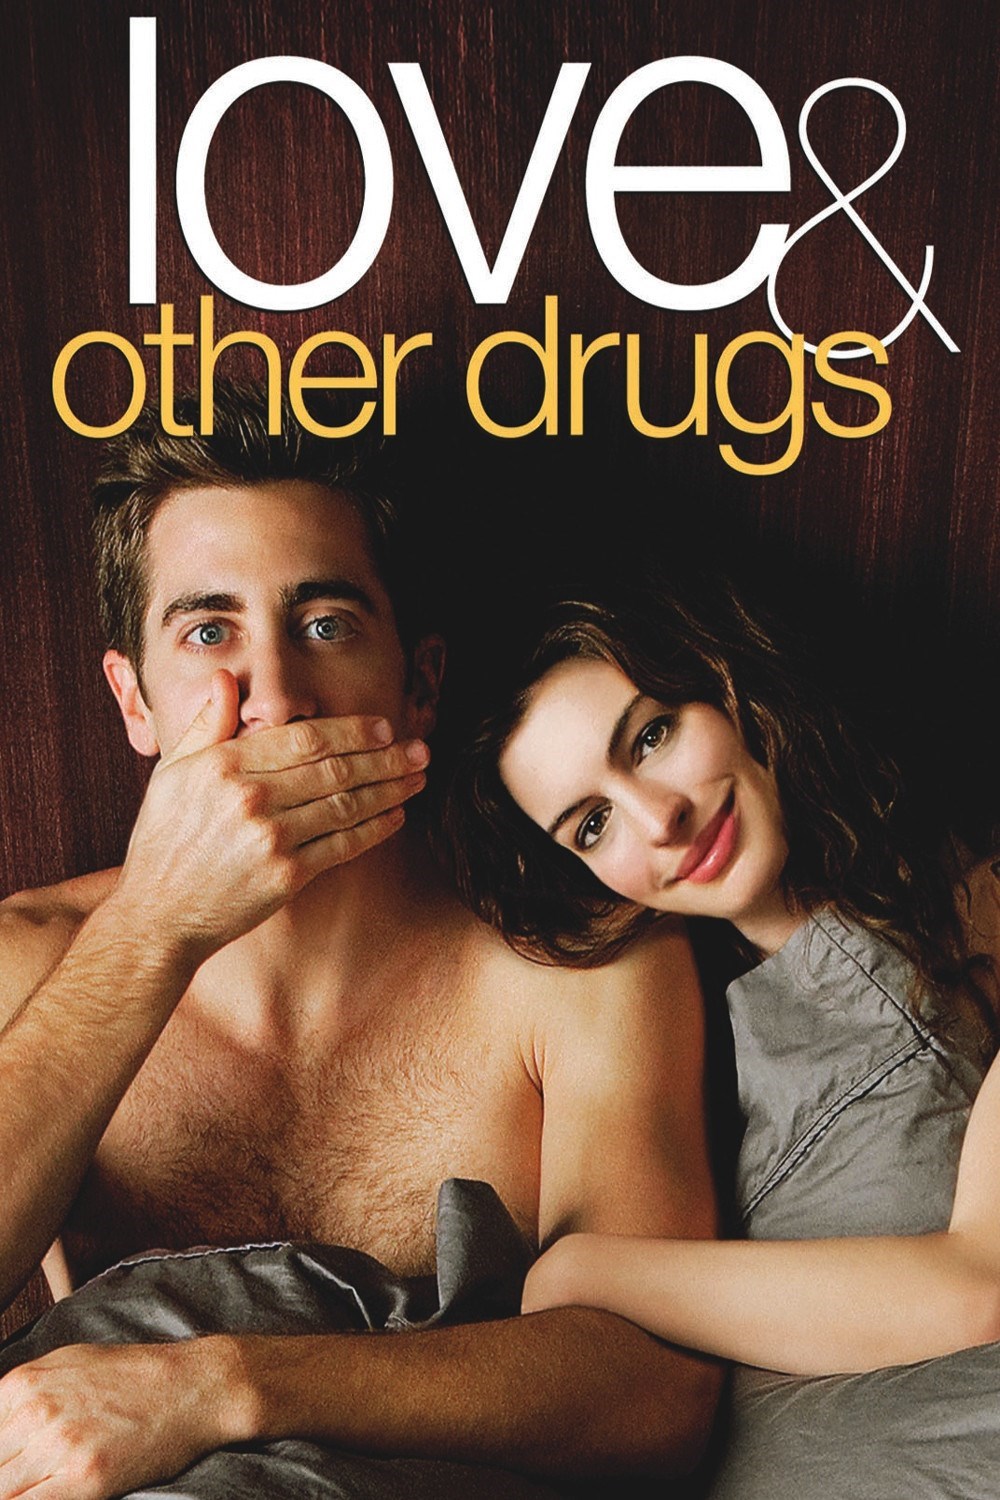 Nice Images Collection: Love & Other Drugs Desktop Wallpapers